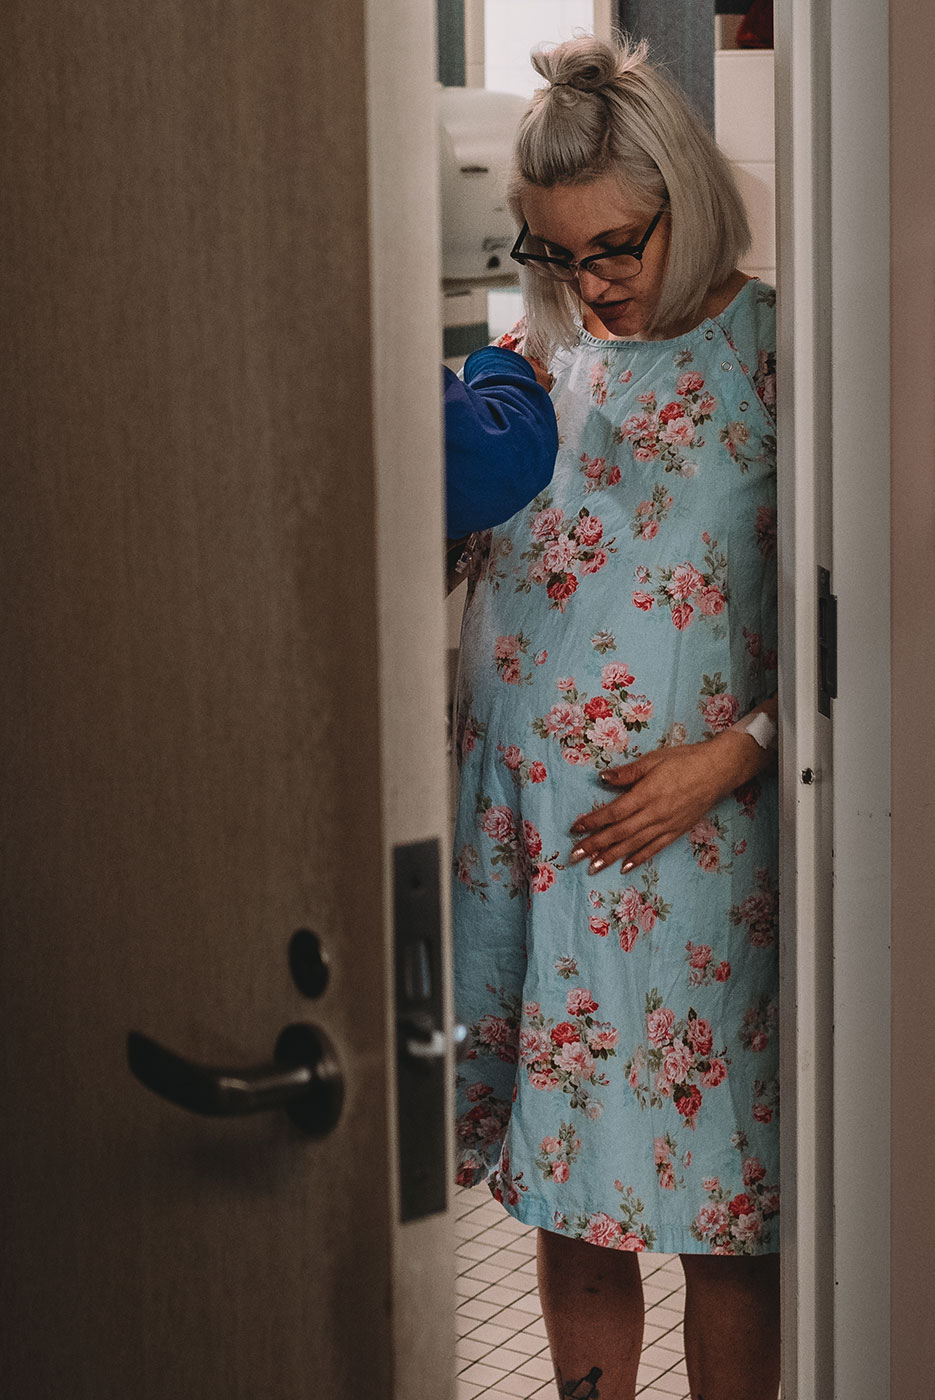 mom stands up in the doorway of the hospital room and touches her pregnant belly